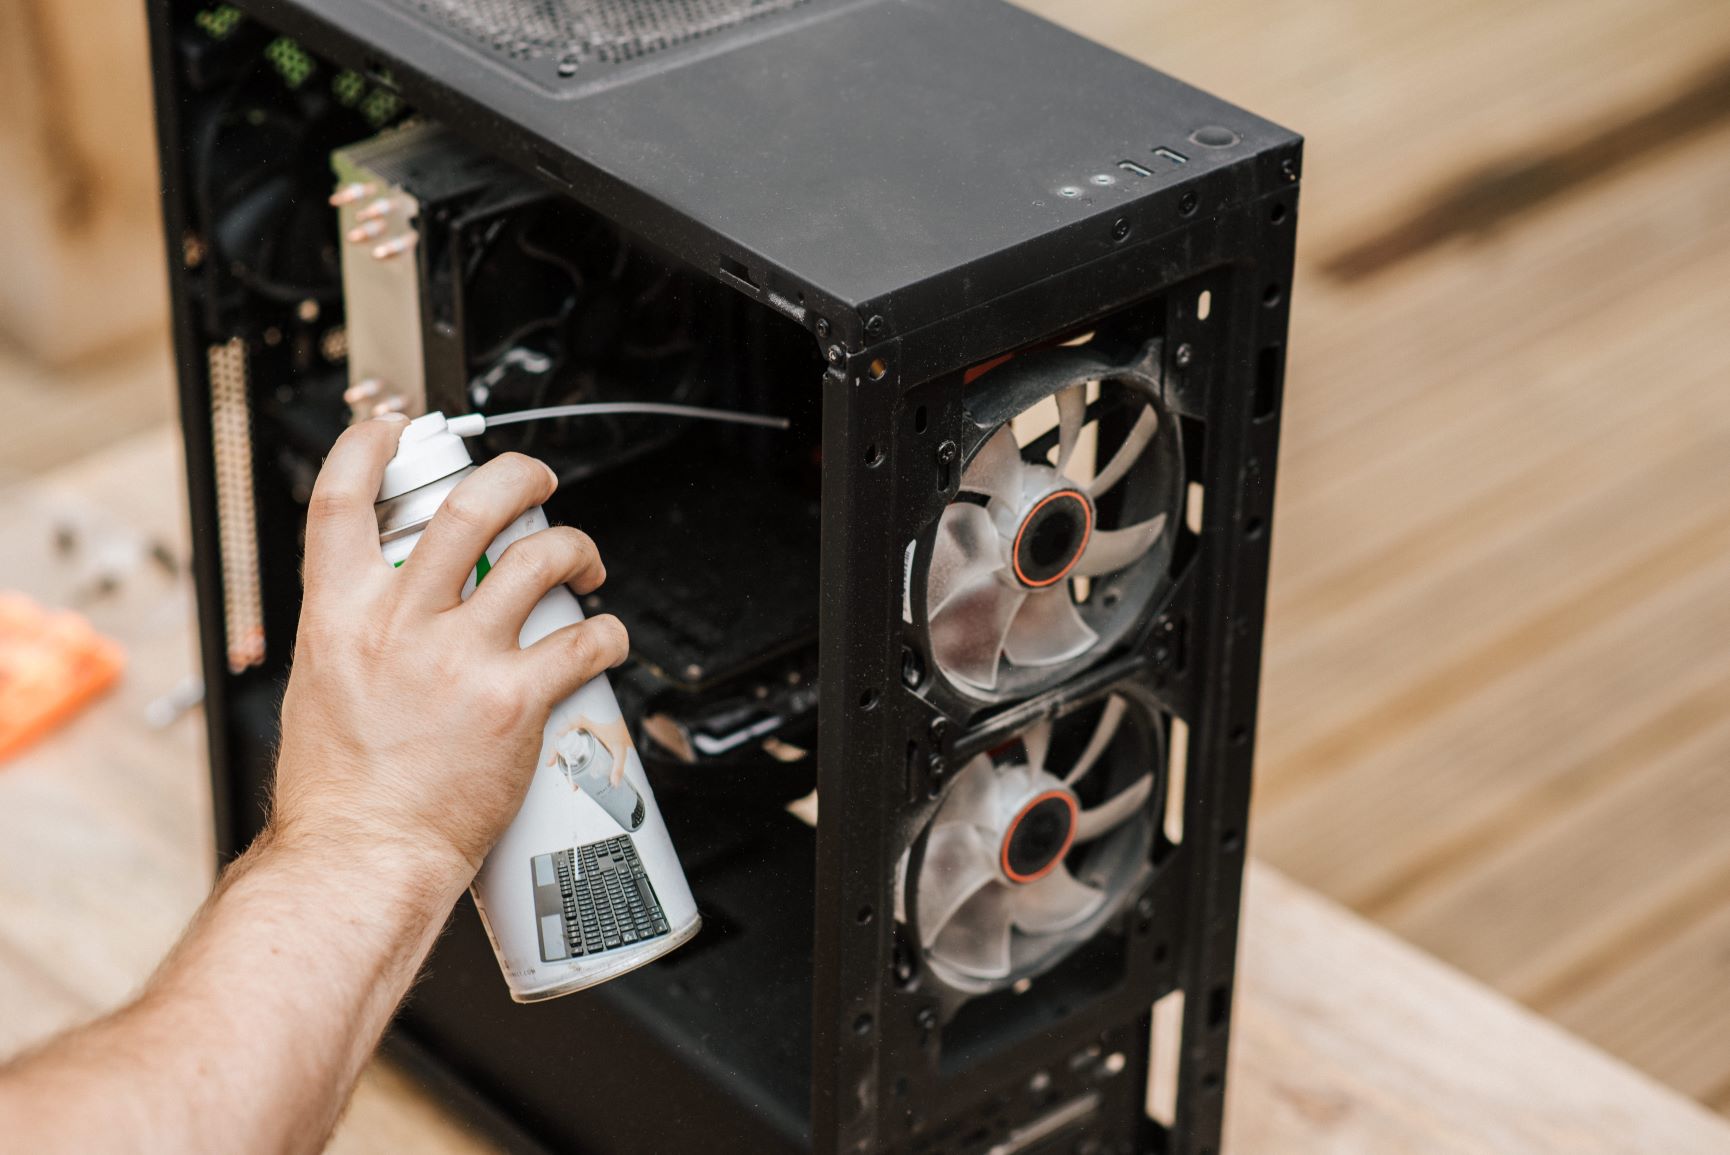 Ensure proper ventilation and airflow in the PC case
Clean dust from heat sinks and cooling fans